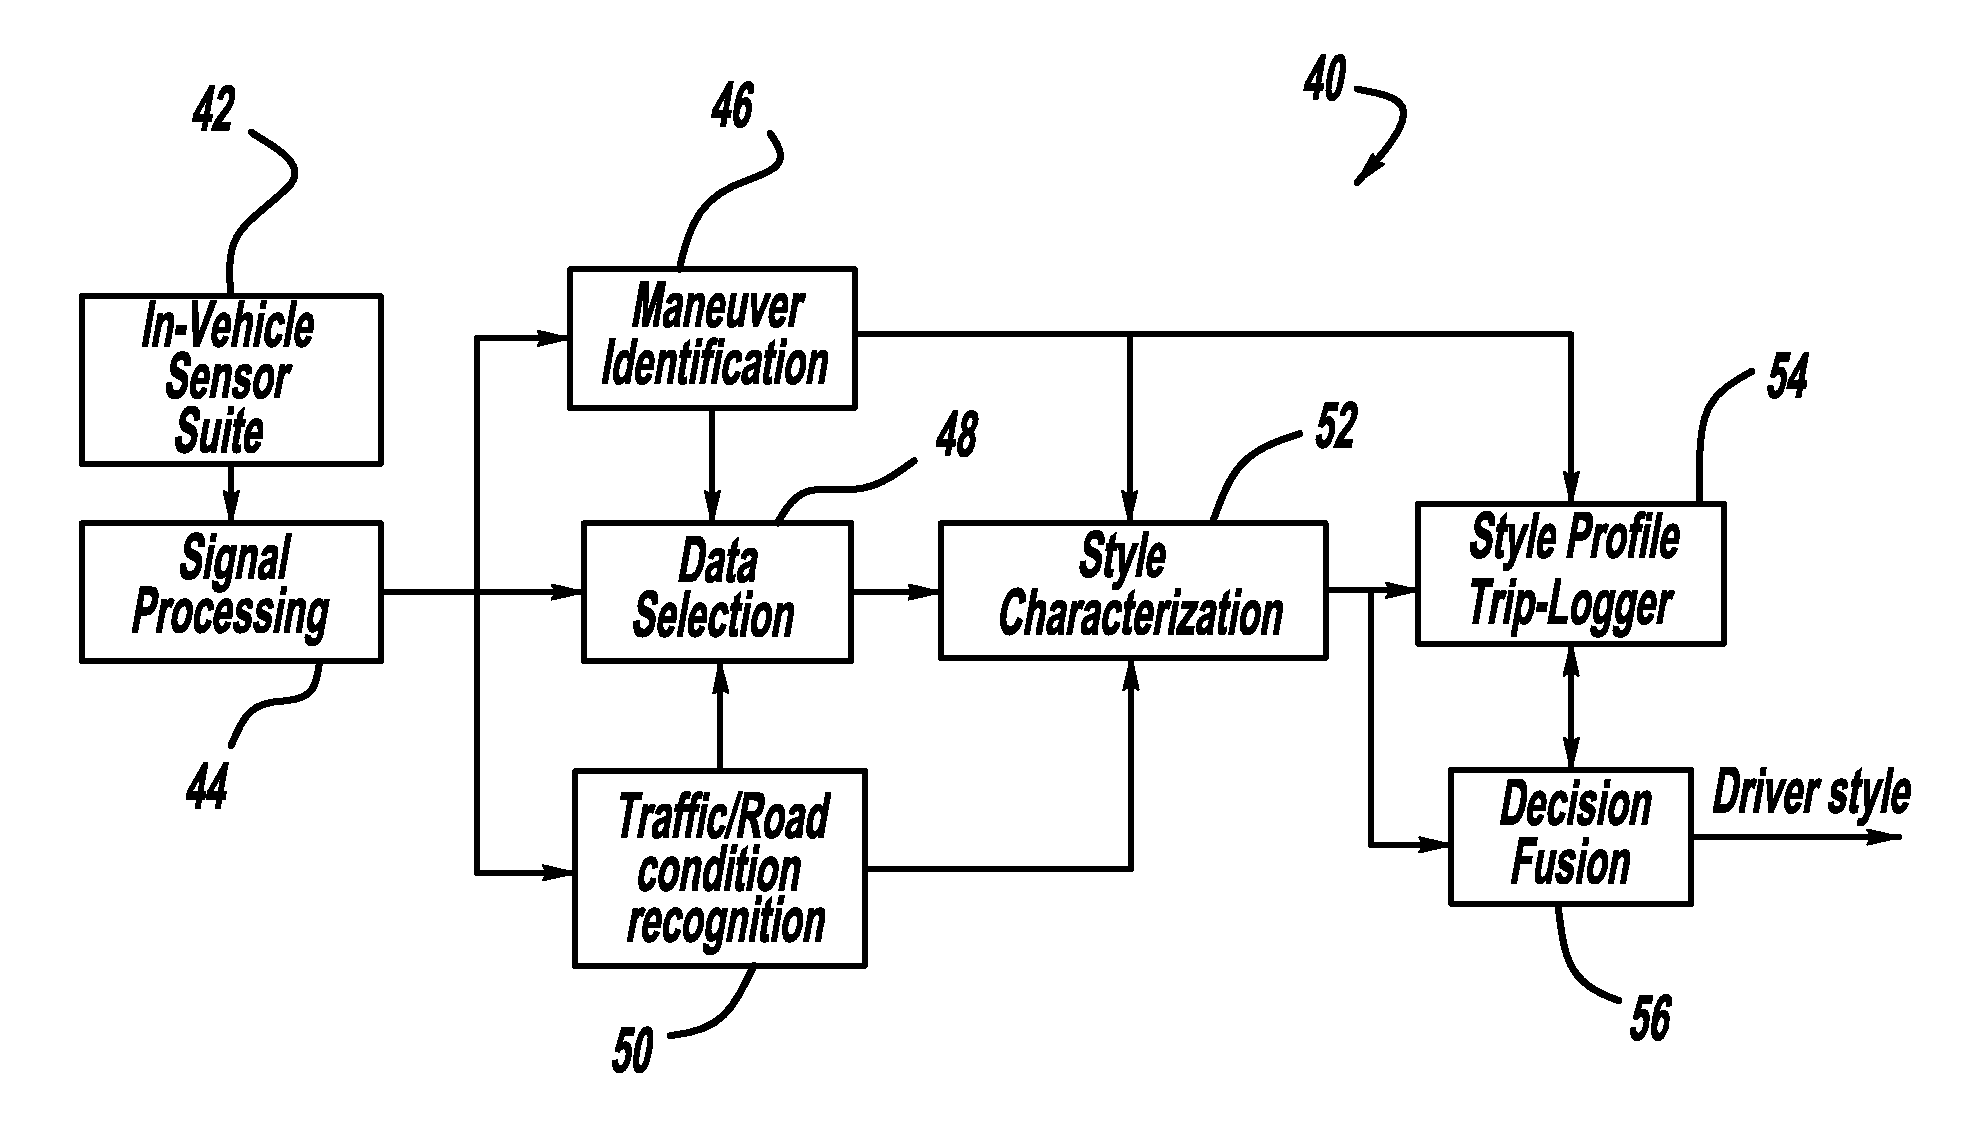 Adaptive vehicle control system with driving style recognition based on headway distance